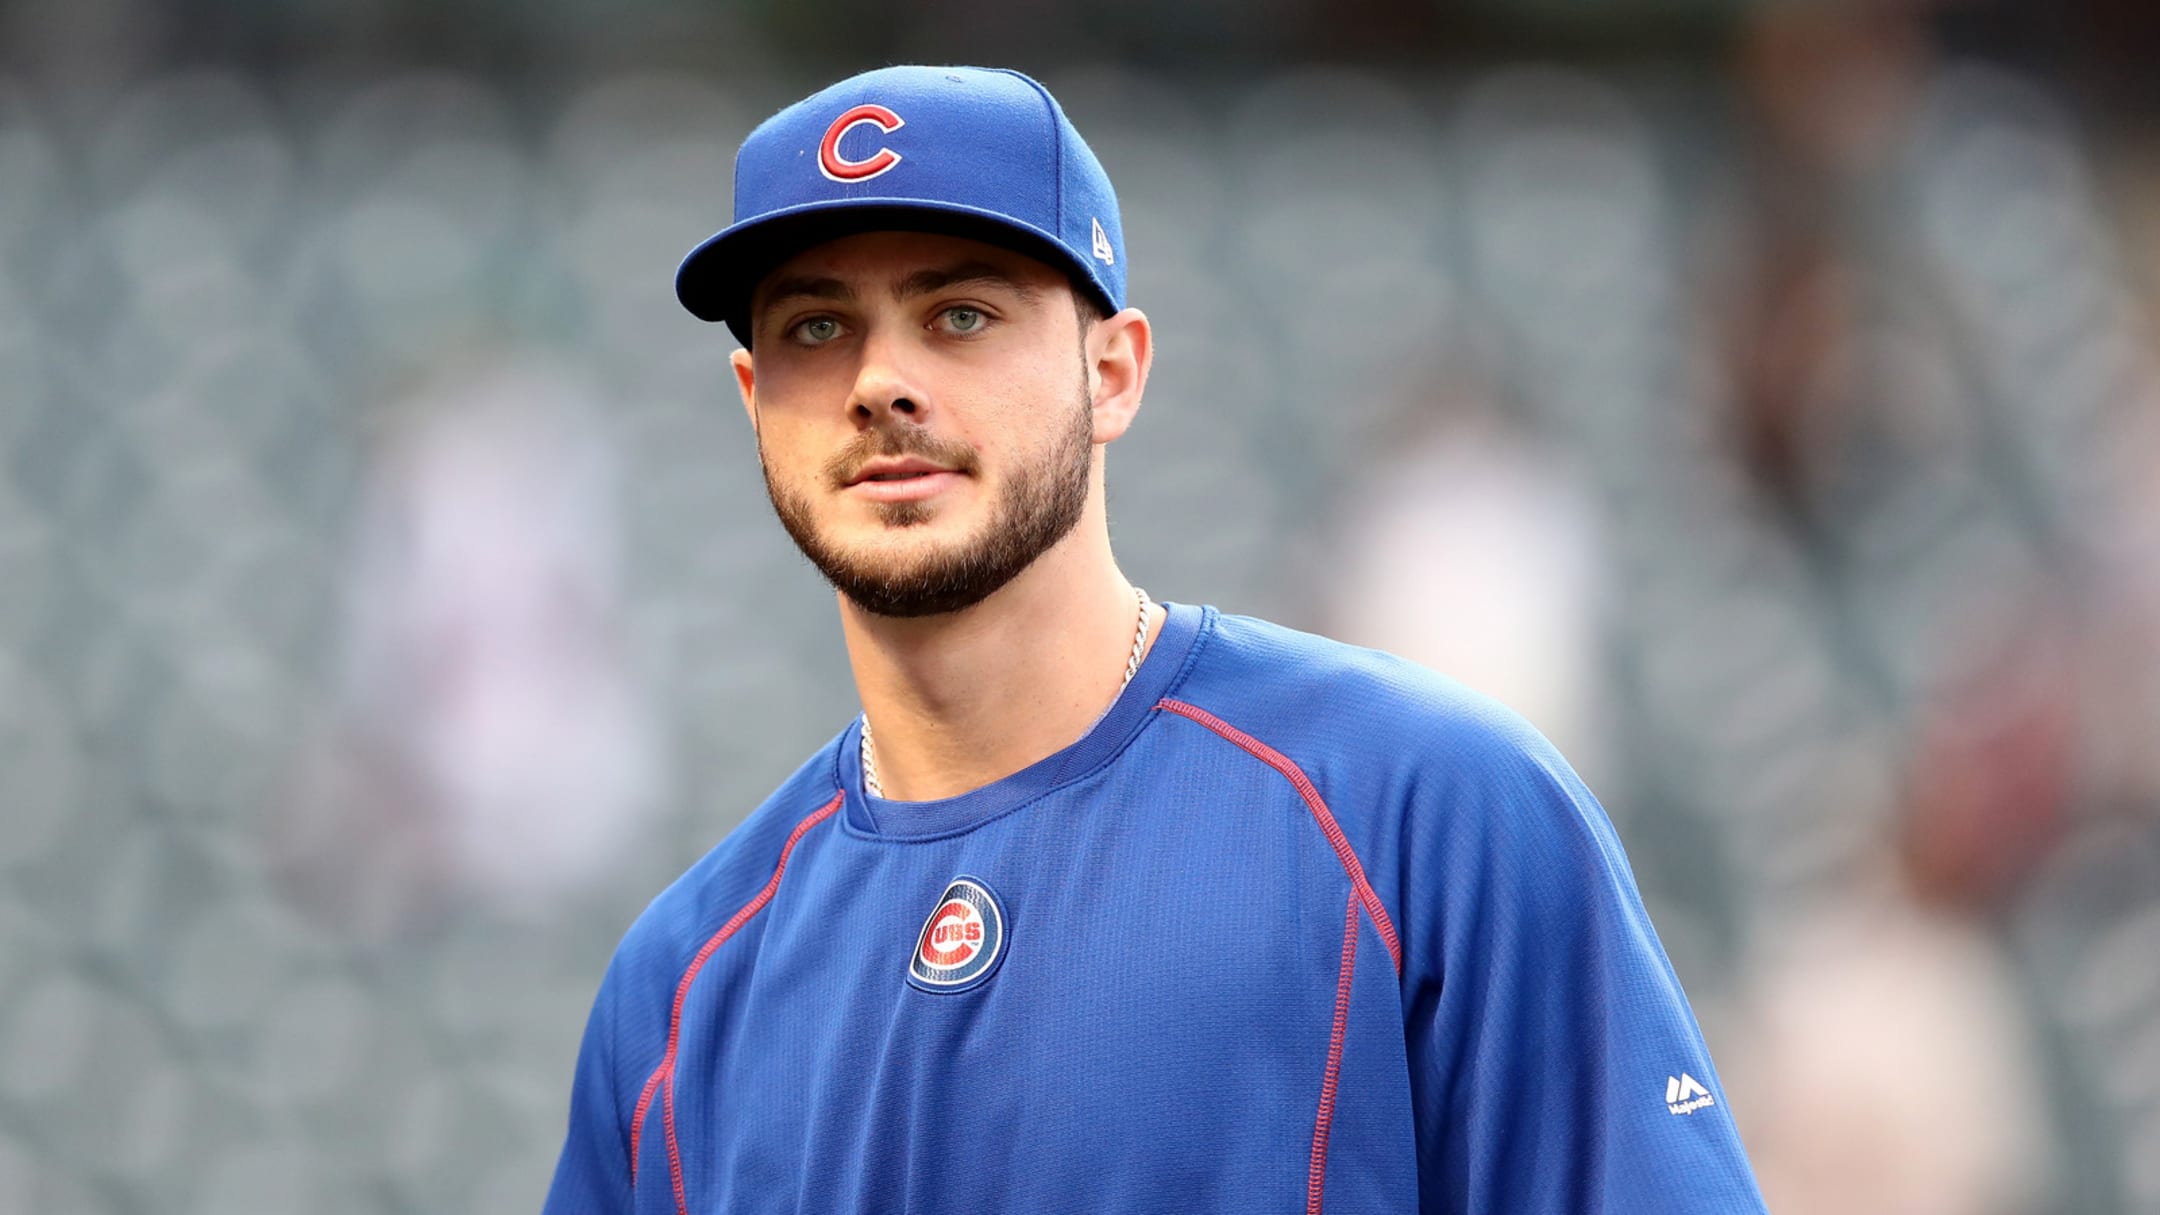 Cubs third baseman Kris Bryant could be face of franchise  and